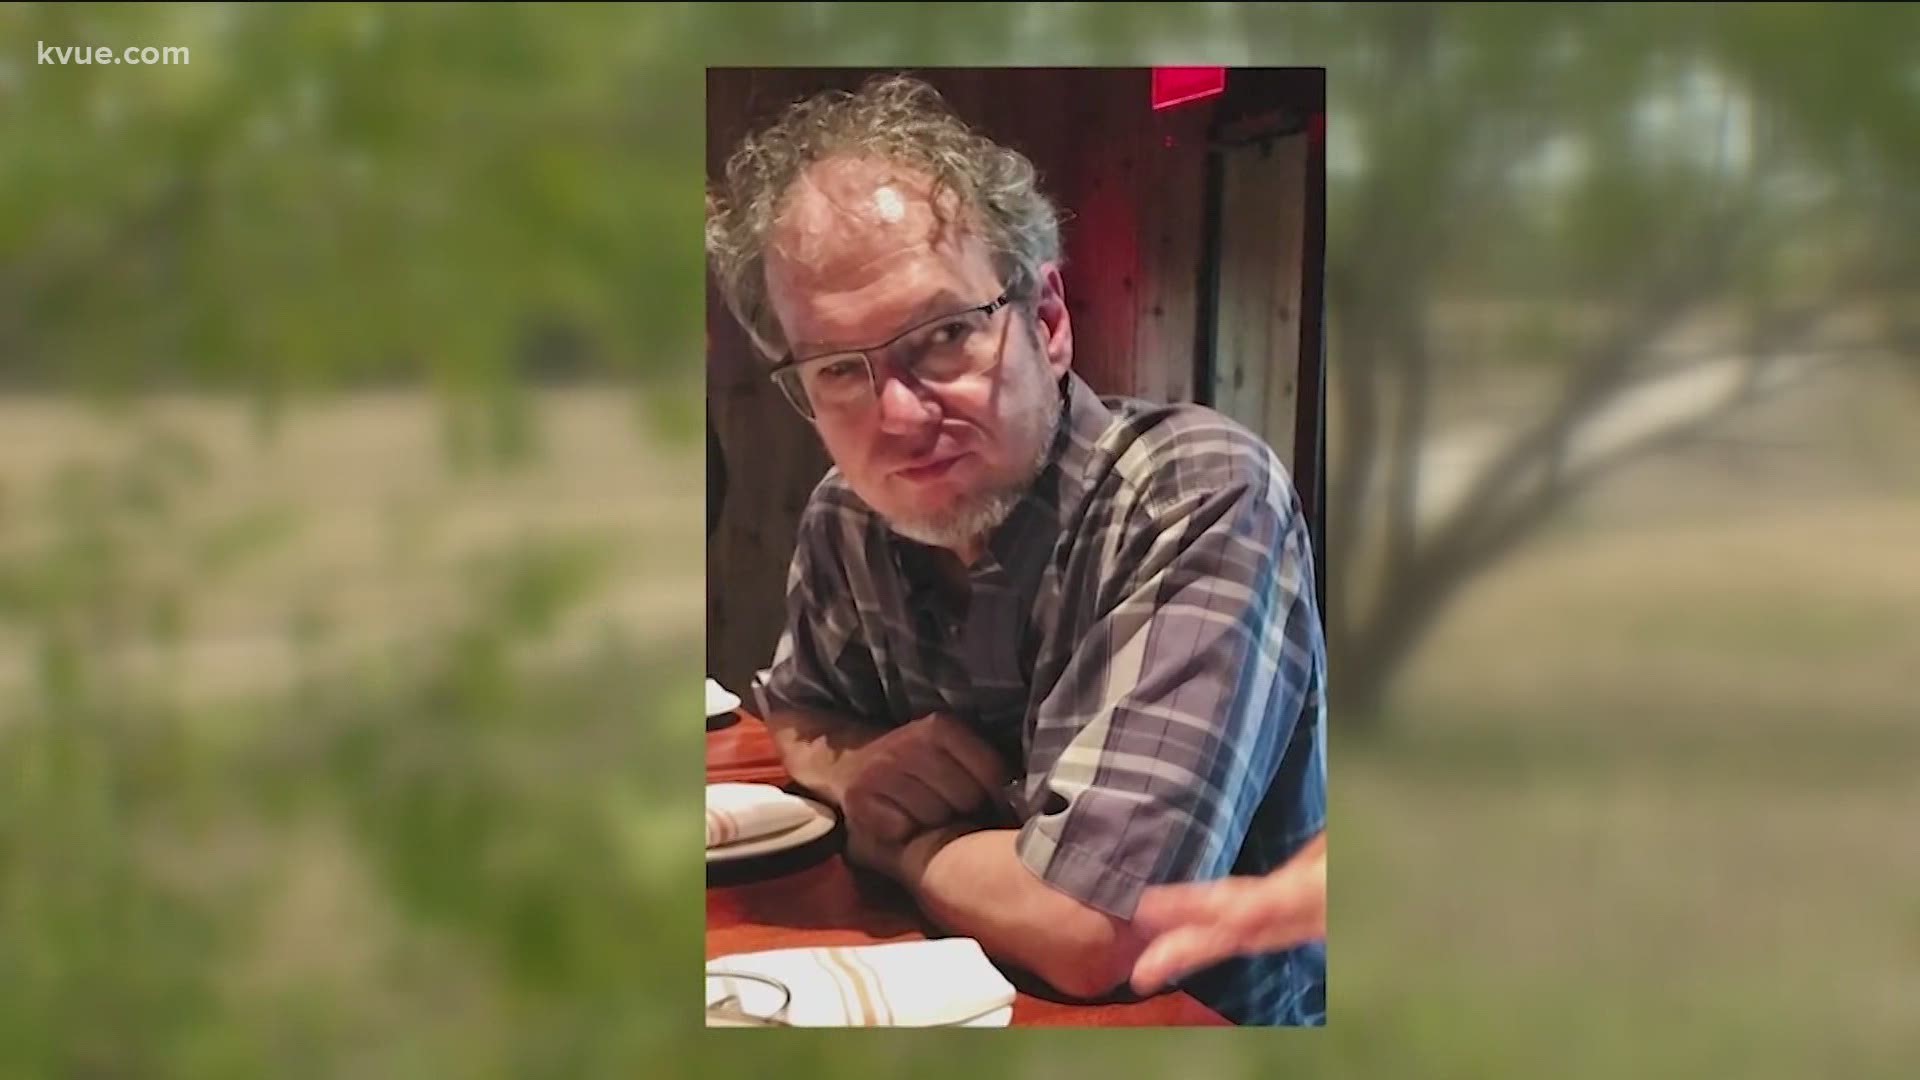 Deputies confirmed a body found in the Granger area Monday was a missing man from Austin.